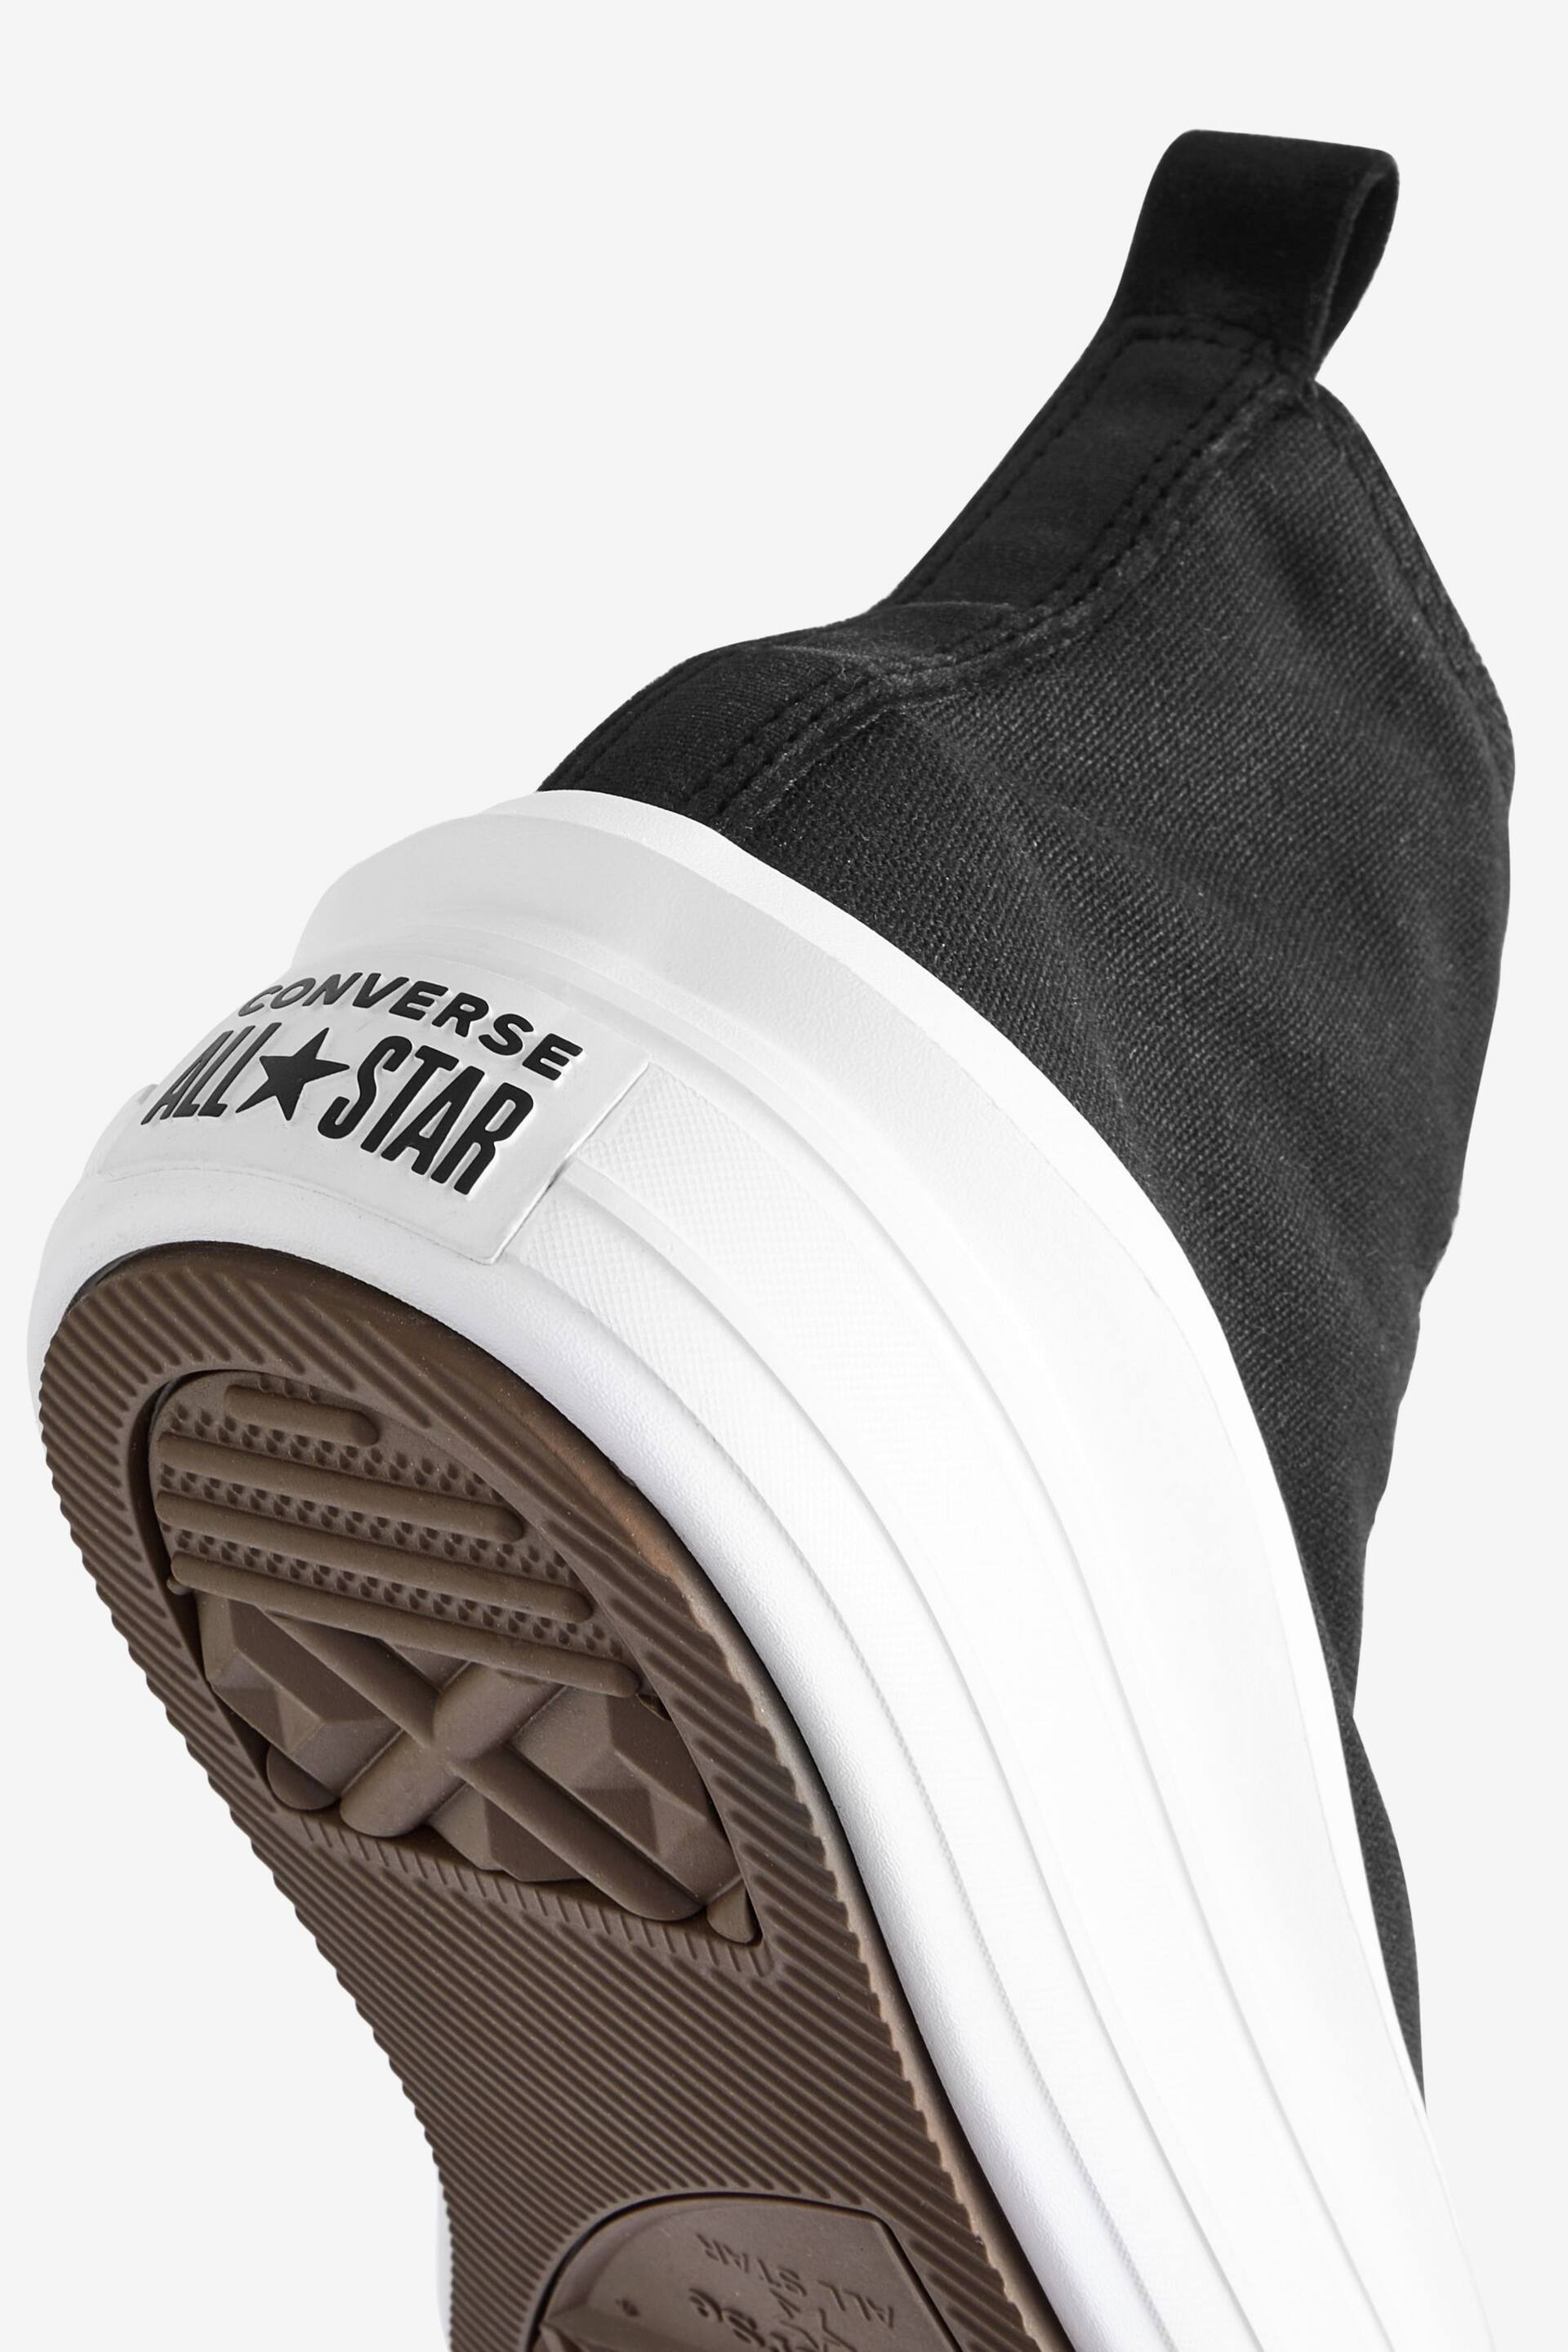 Converse Black Velvet Move Youth Trainers - Image 14 of 14